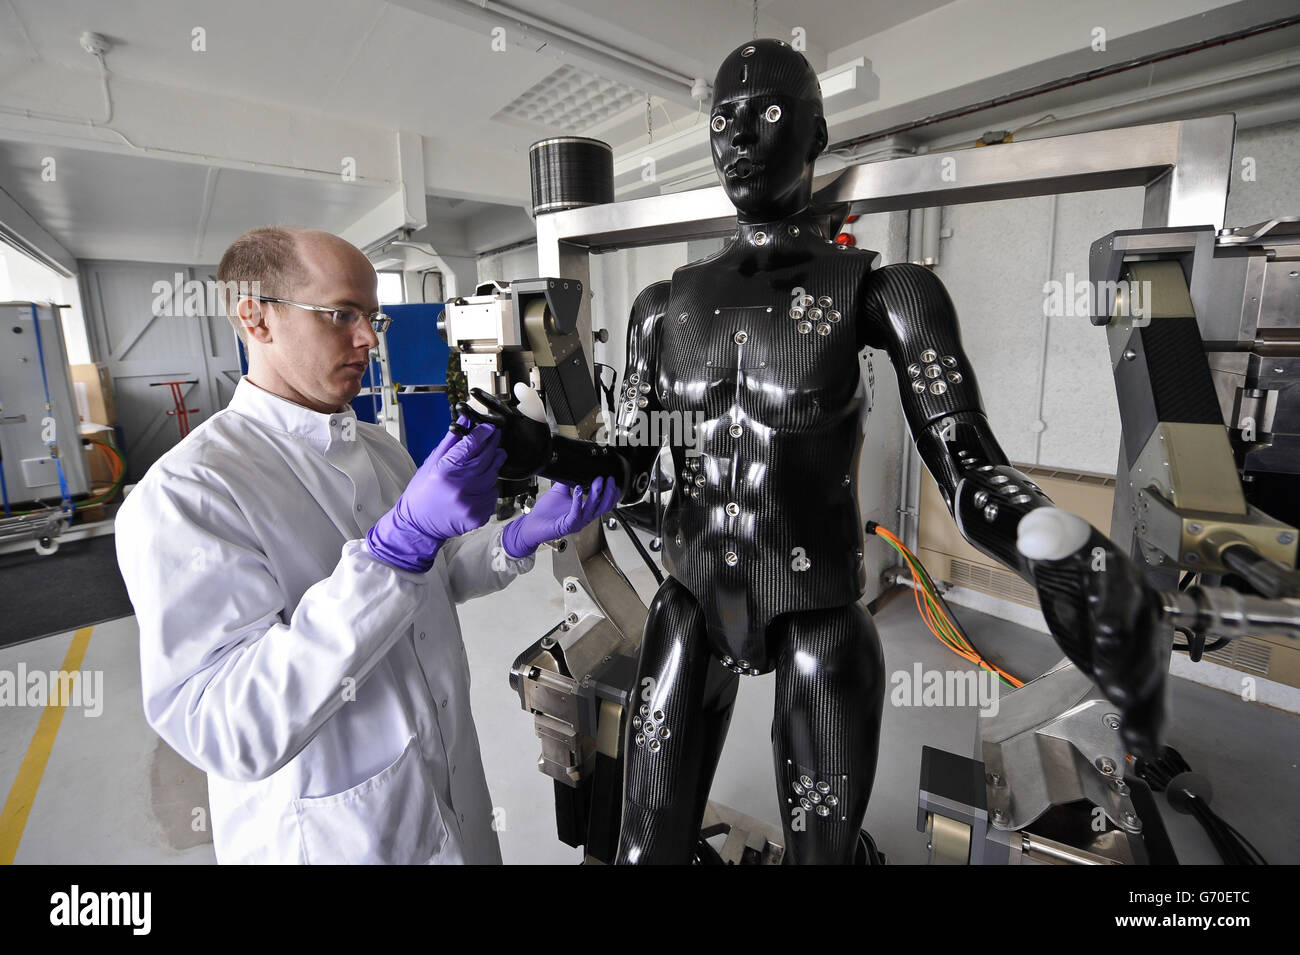 Jaime Cummins, of Dstl's Chemical and Biological Physical Protection group, checks the Porton Man robot mannequin, that will help test the next generation of chemical and biological suits for the UK's armed forces, which has been unveiled at Porton Down, Wiltshire. Stock Photo